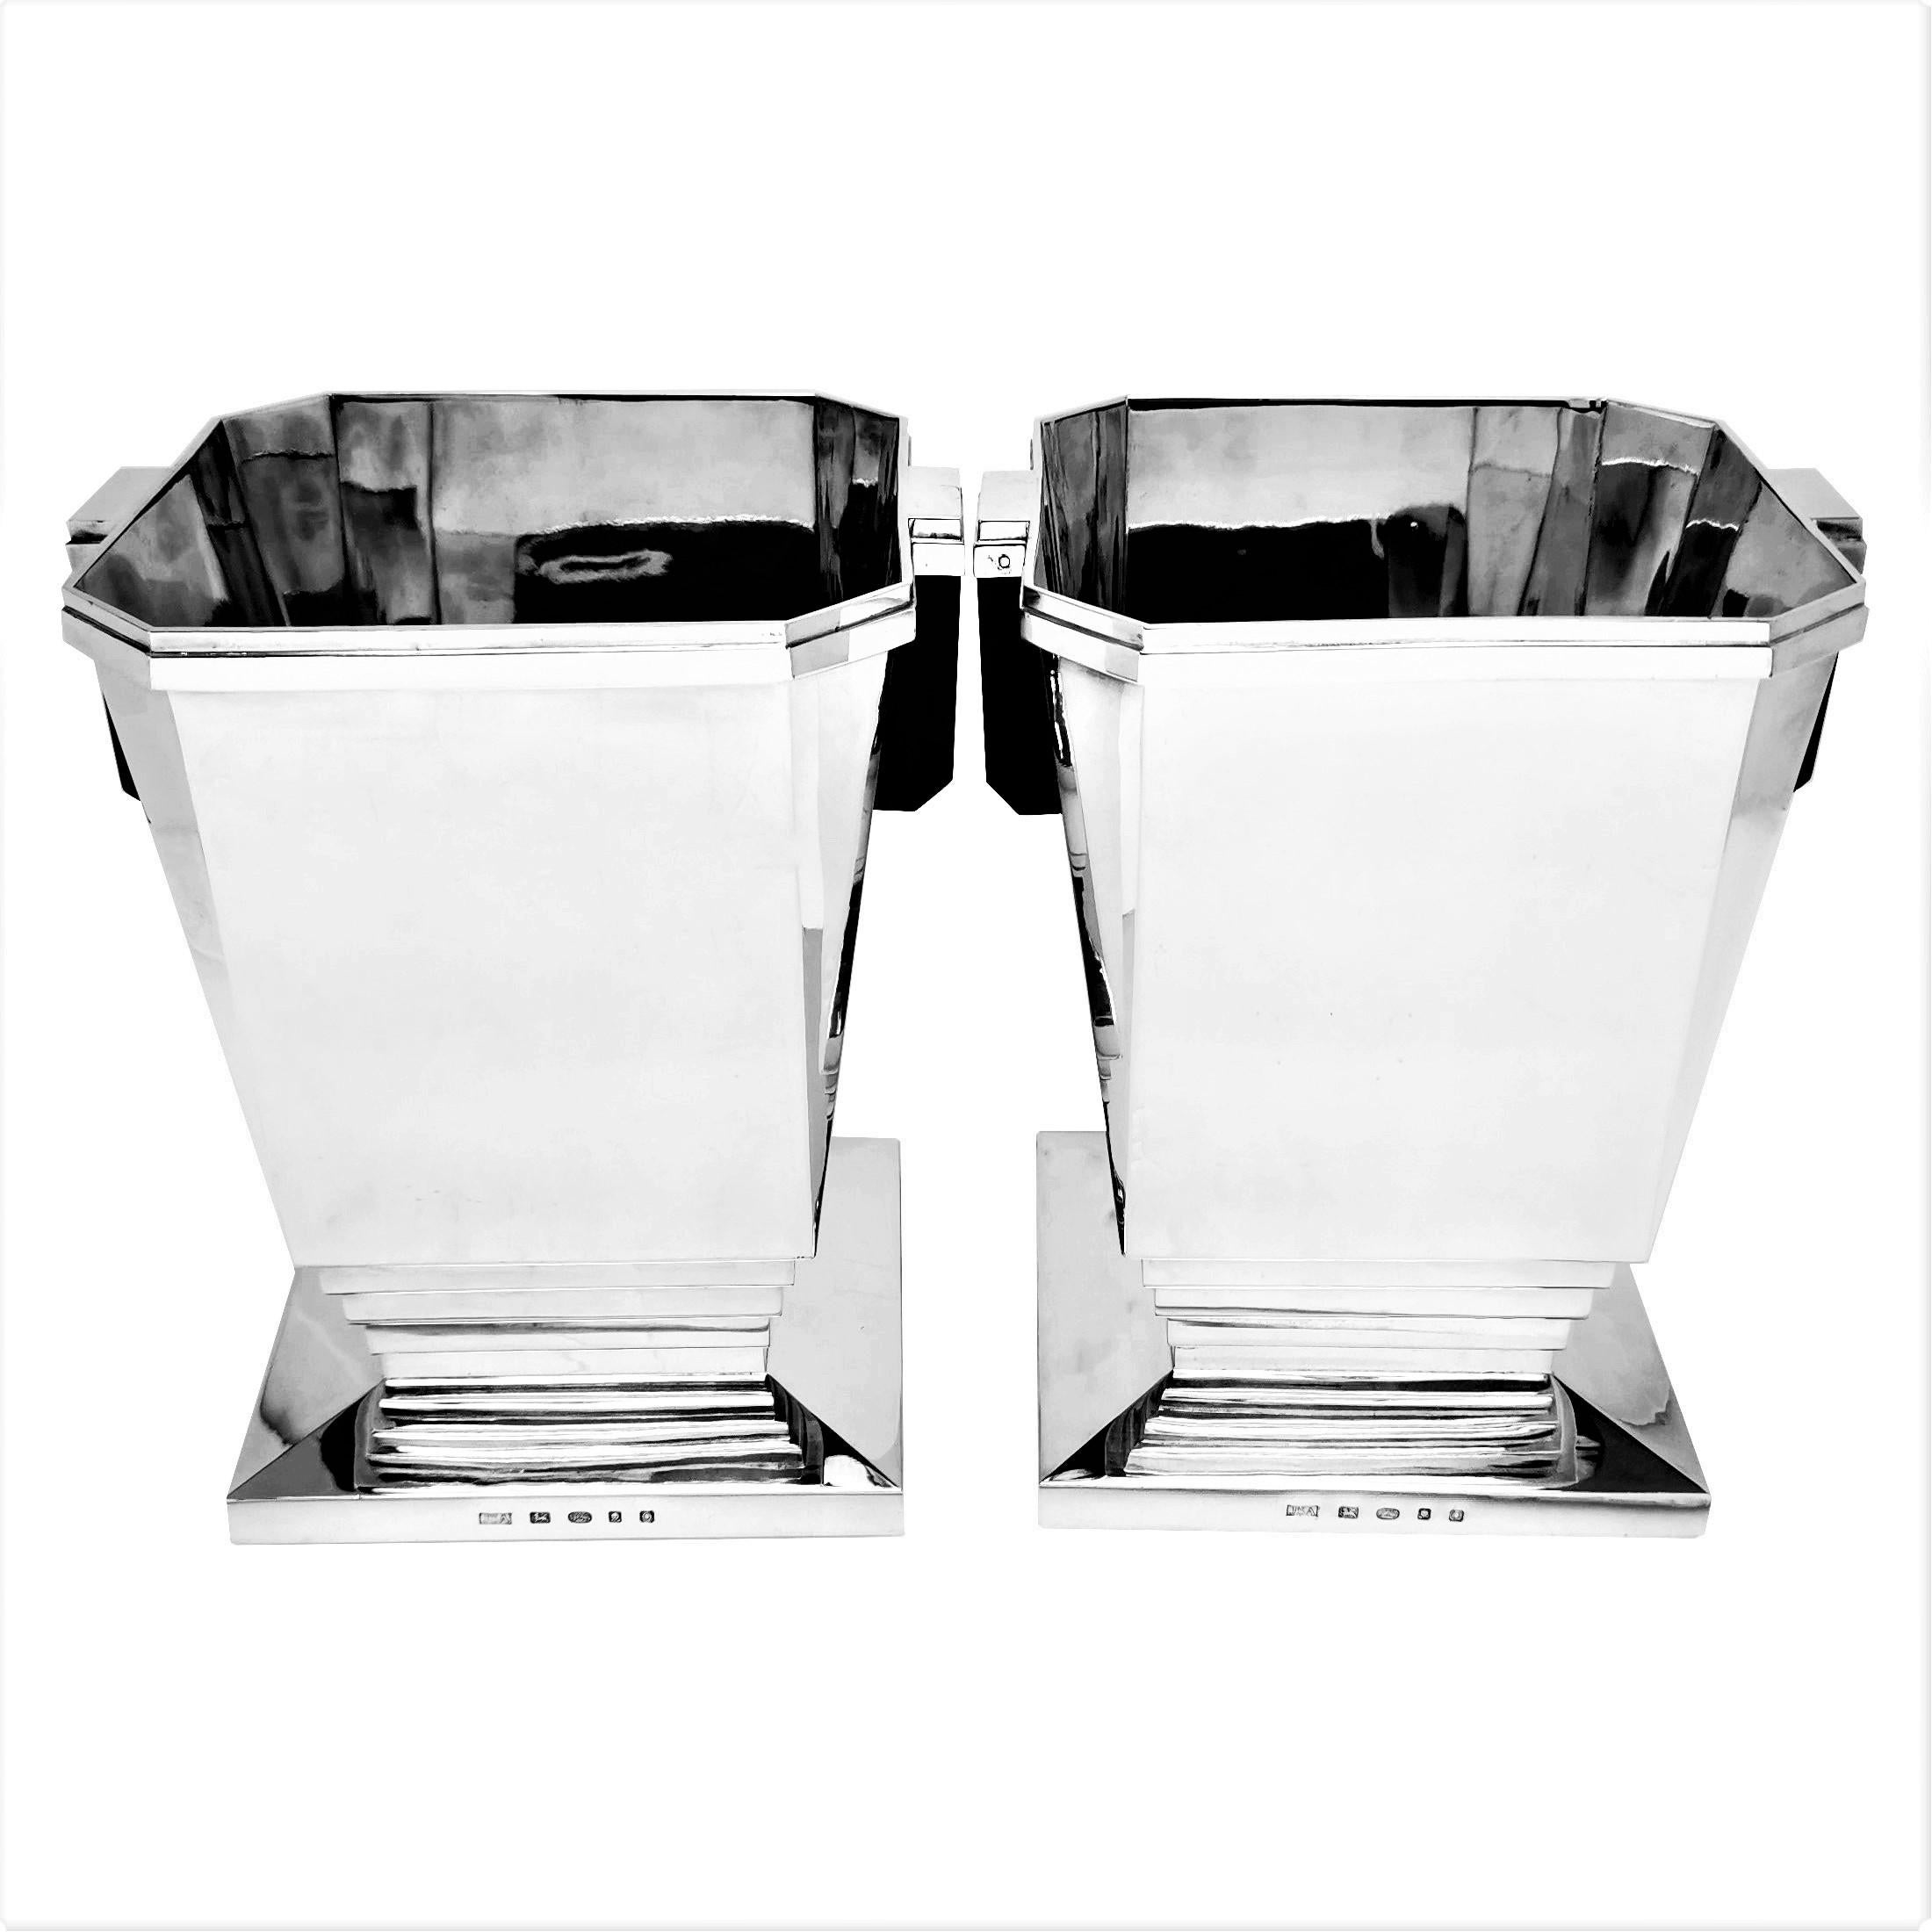 A pair of magnificent modern Solid Silver Wine Coolers. The design of these exceptional Champagne Buckets is inspired by the clean lines and elegant sensibilities of the Art Deco period giving them a historical gravitas while appealing to modern